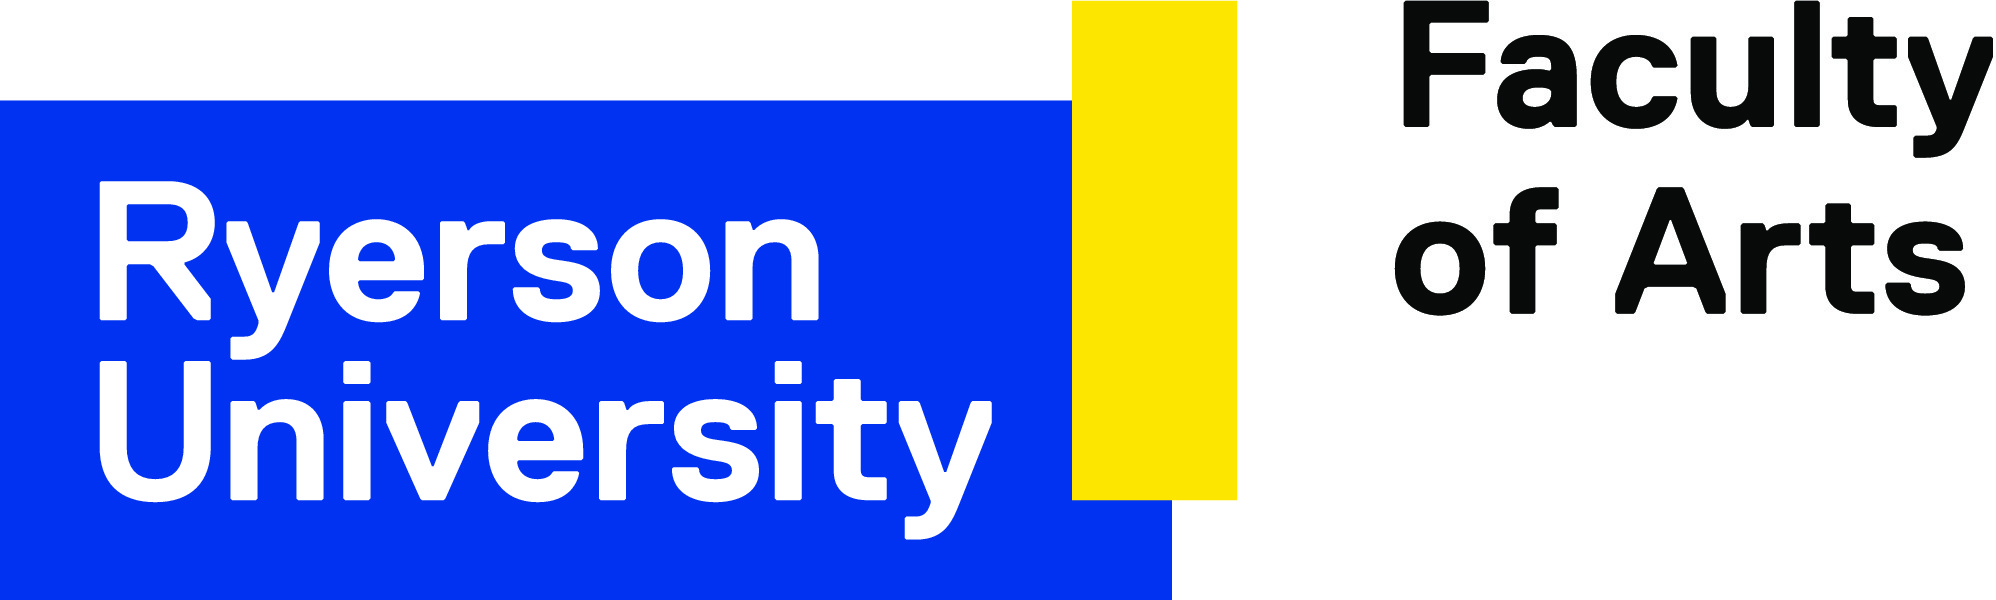 Ryerson Faculty of Arts